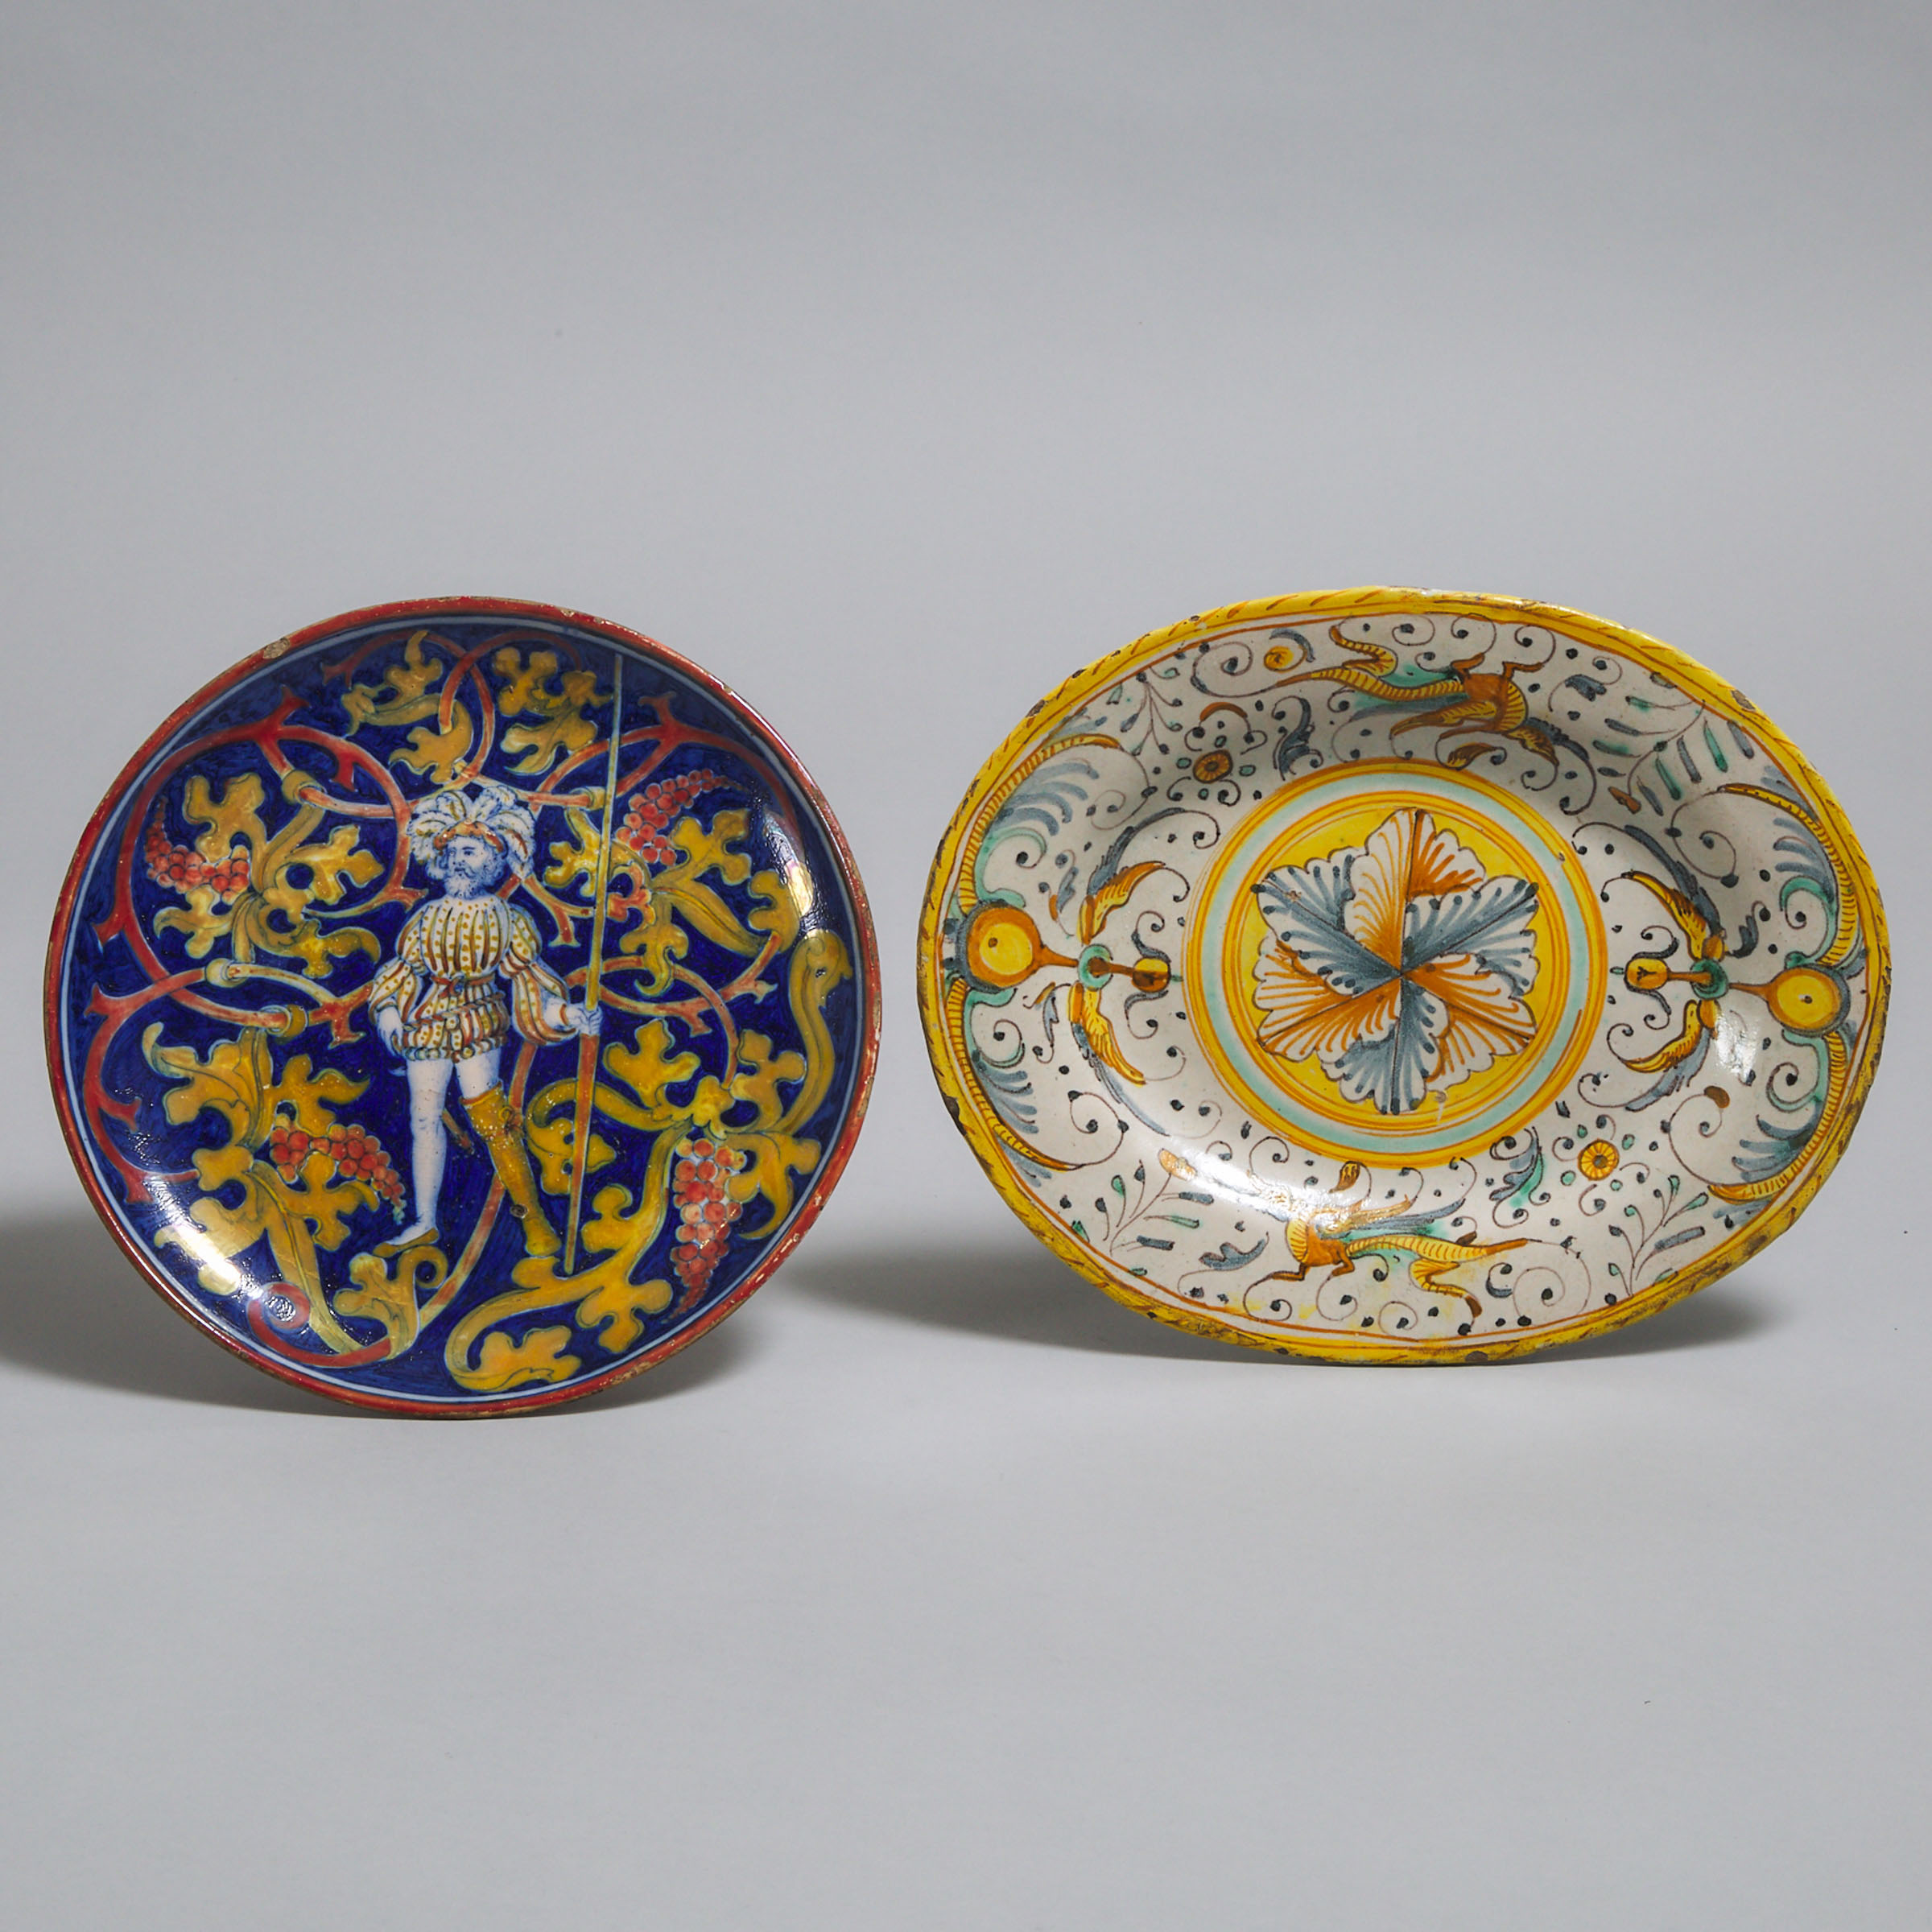 Italian Lustre Decorated Maiolica Plate and an Oval Dish, late 19th/early 20th century